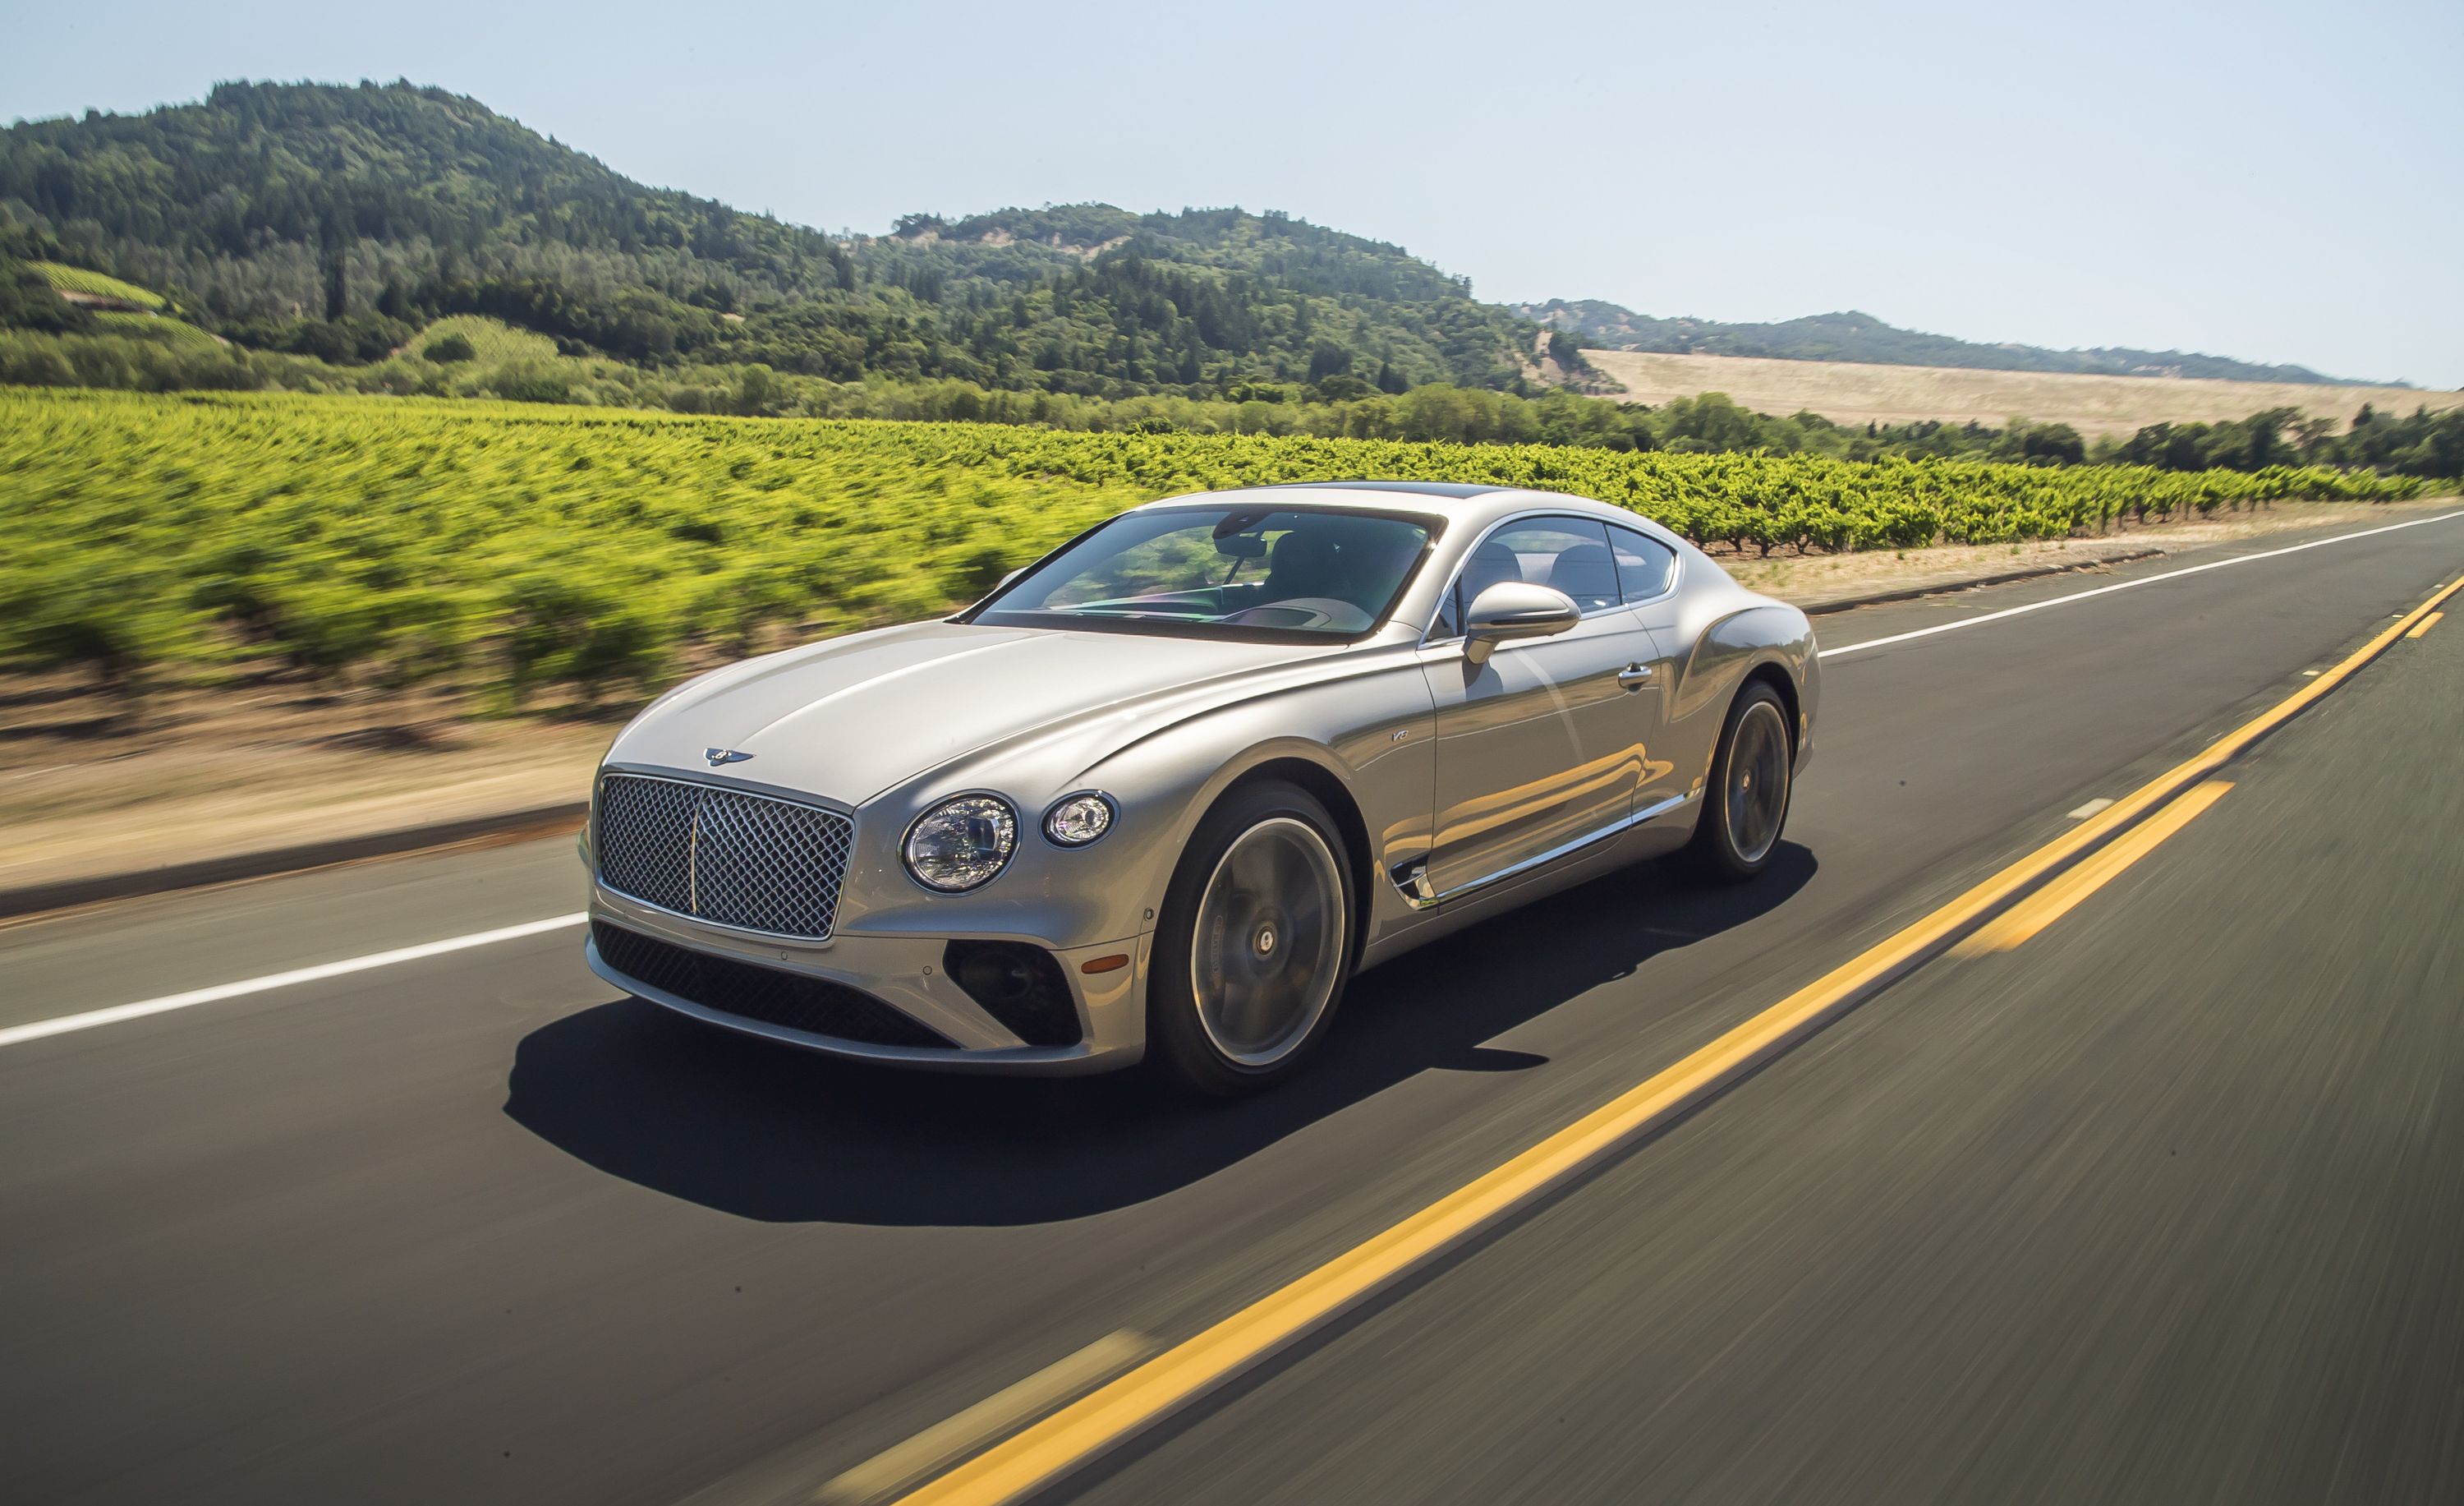 Bentley Continental Gt V8 Gives Up Almost Nothing To The W12